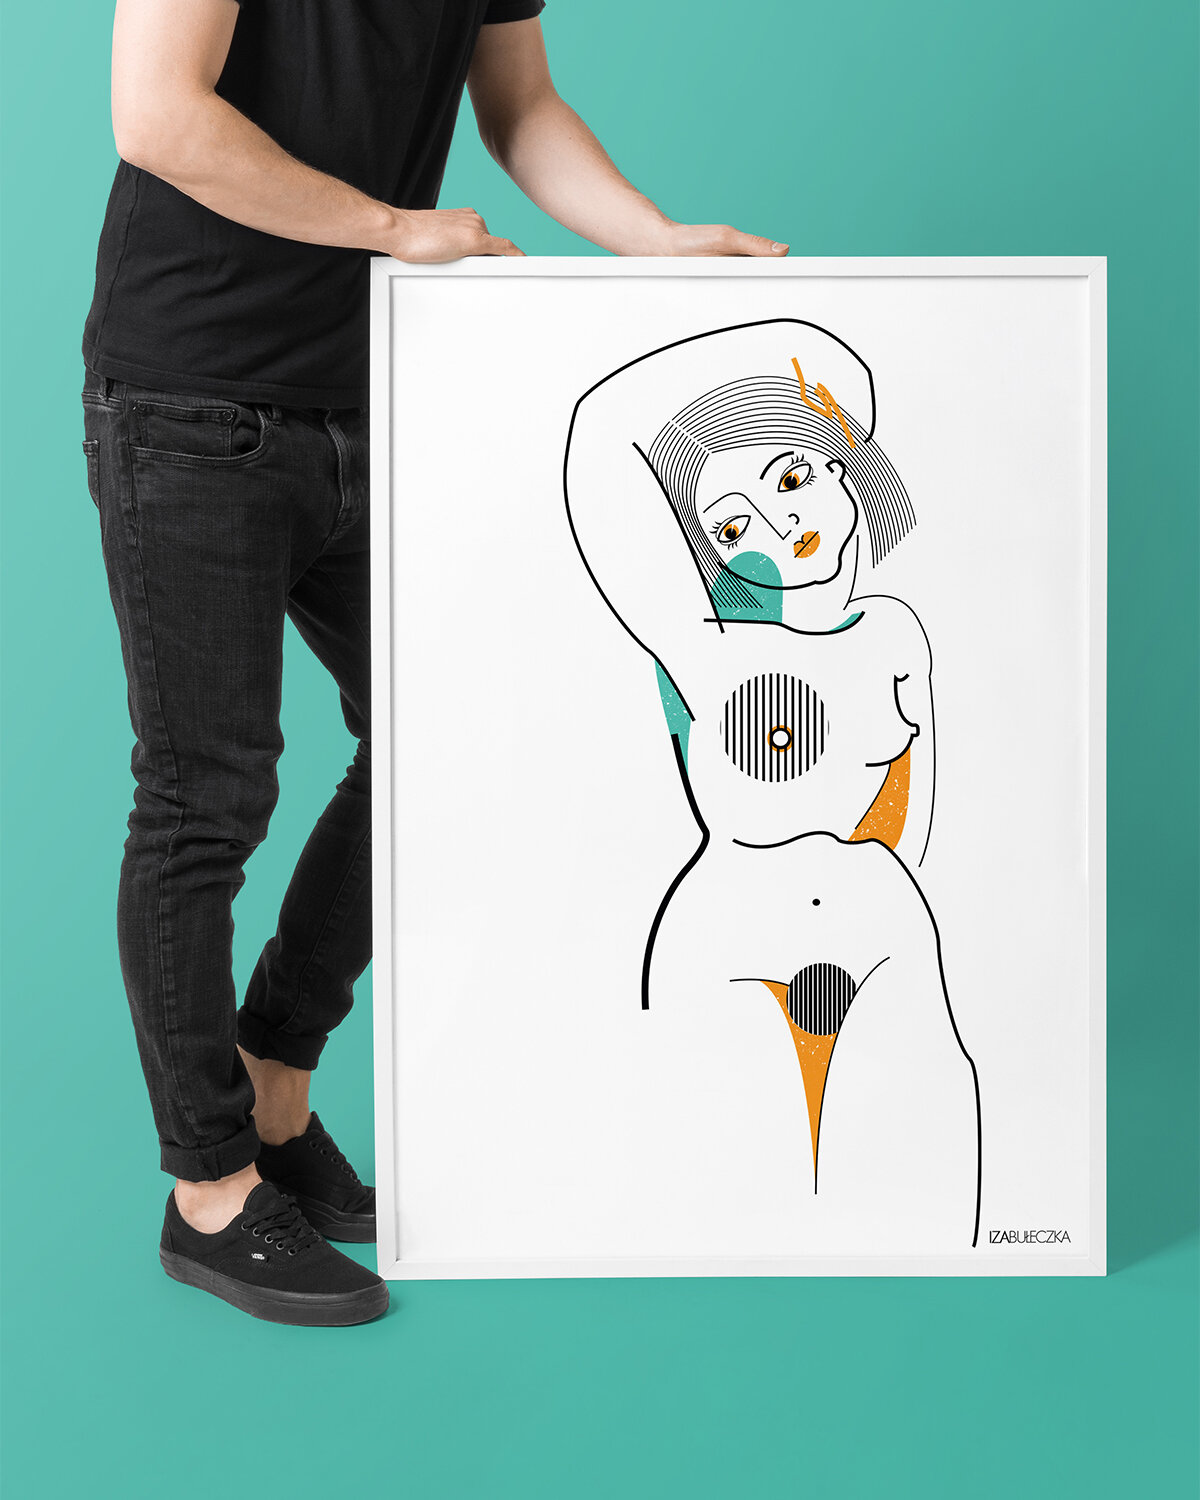 Greek Muse" abstract nude woman illustration